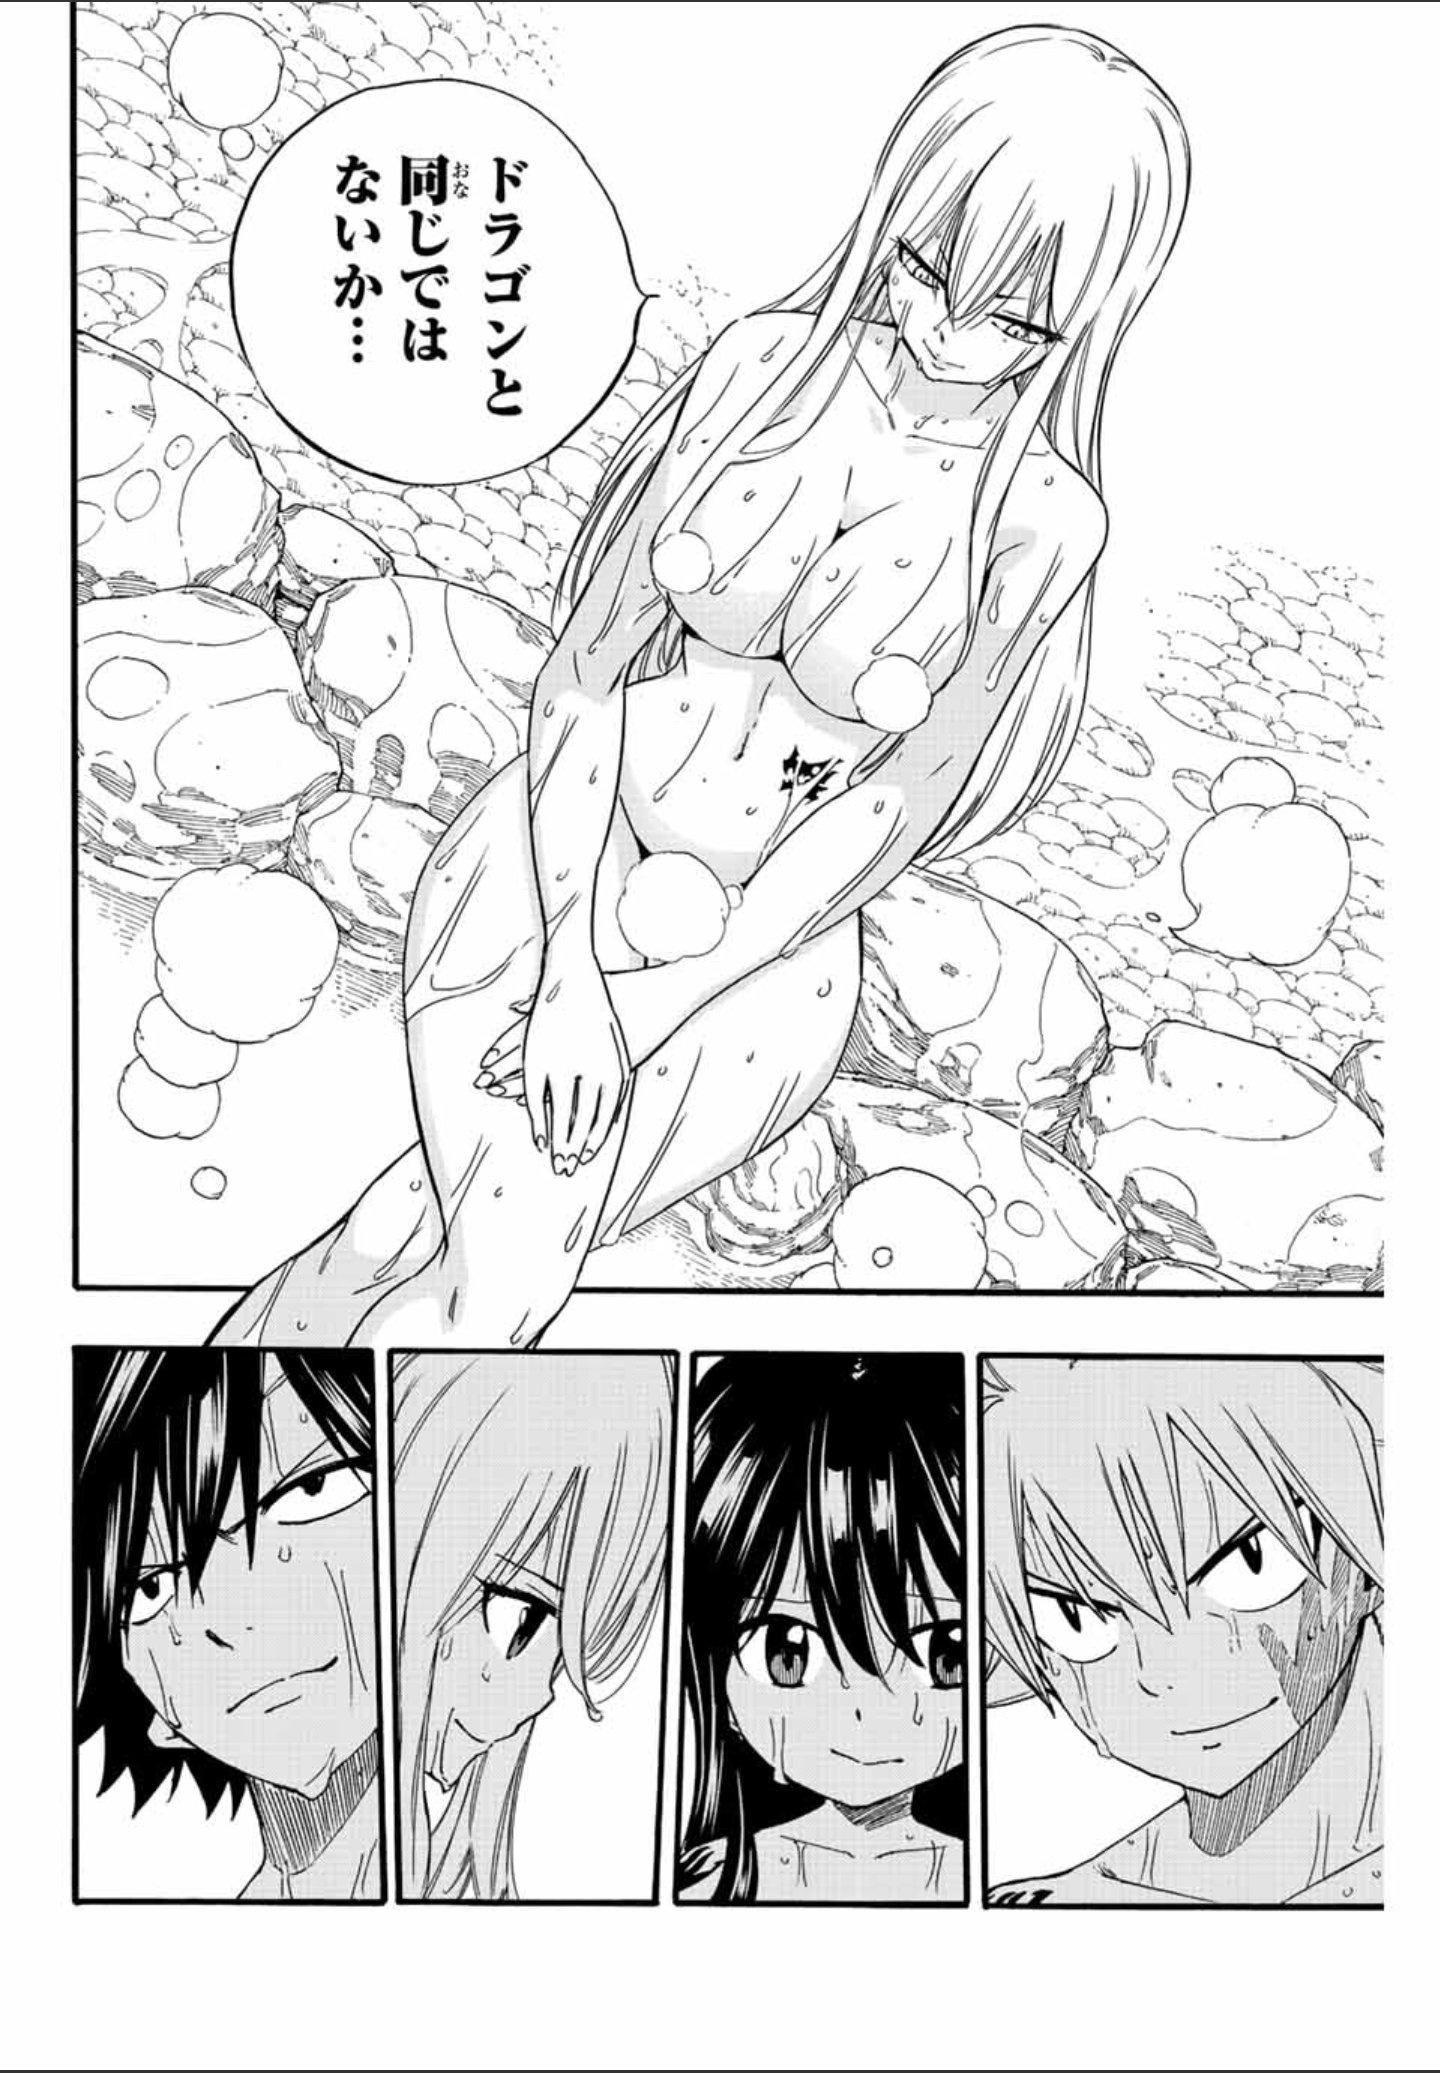 hinh-anh-fan-service-trong-manga-fairy-tail-100-years-quest